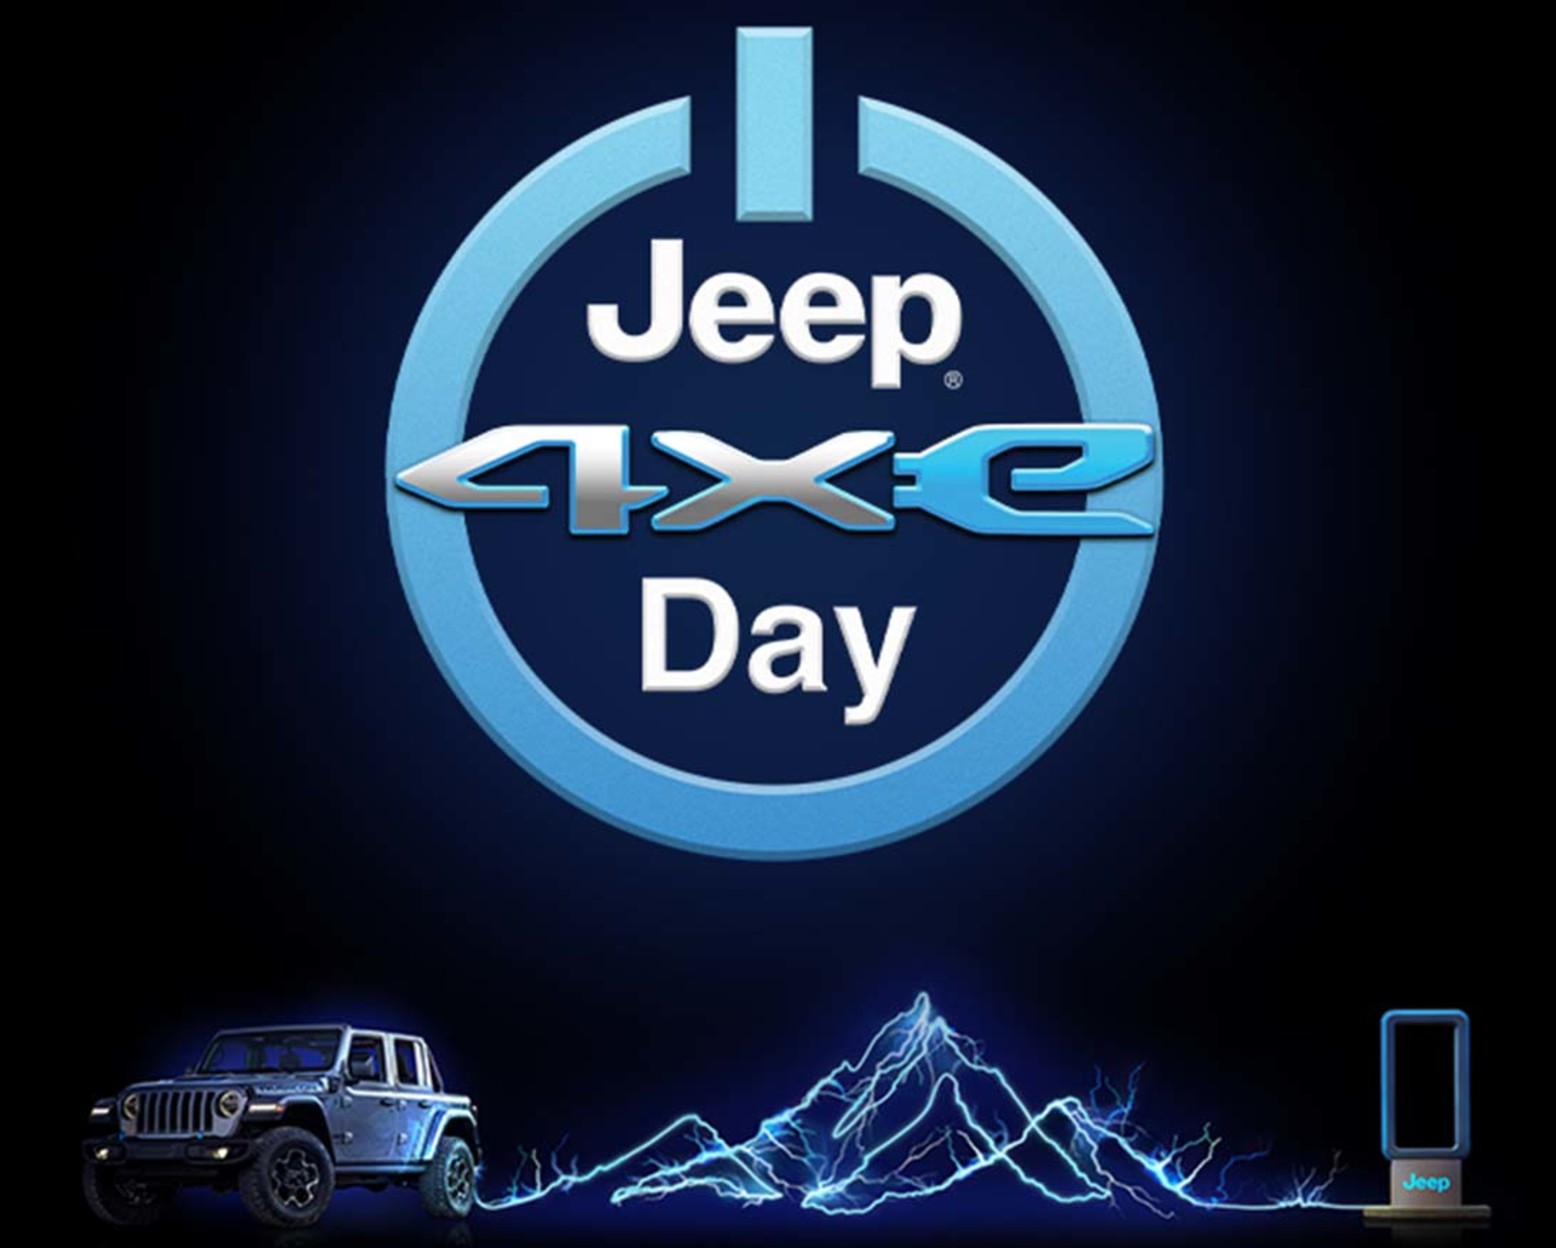 View of grey Jeep 4xe against a black background with blue mountain graphic outlines.